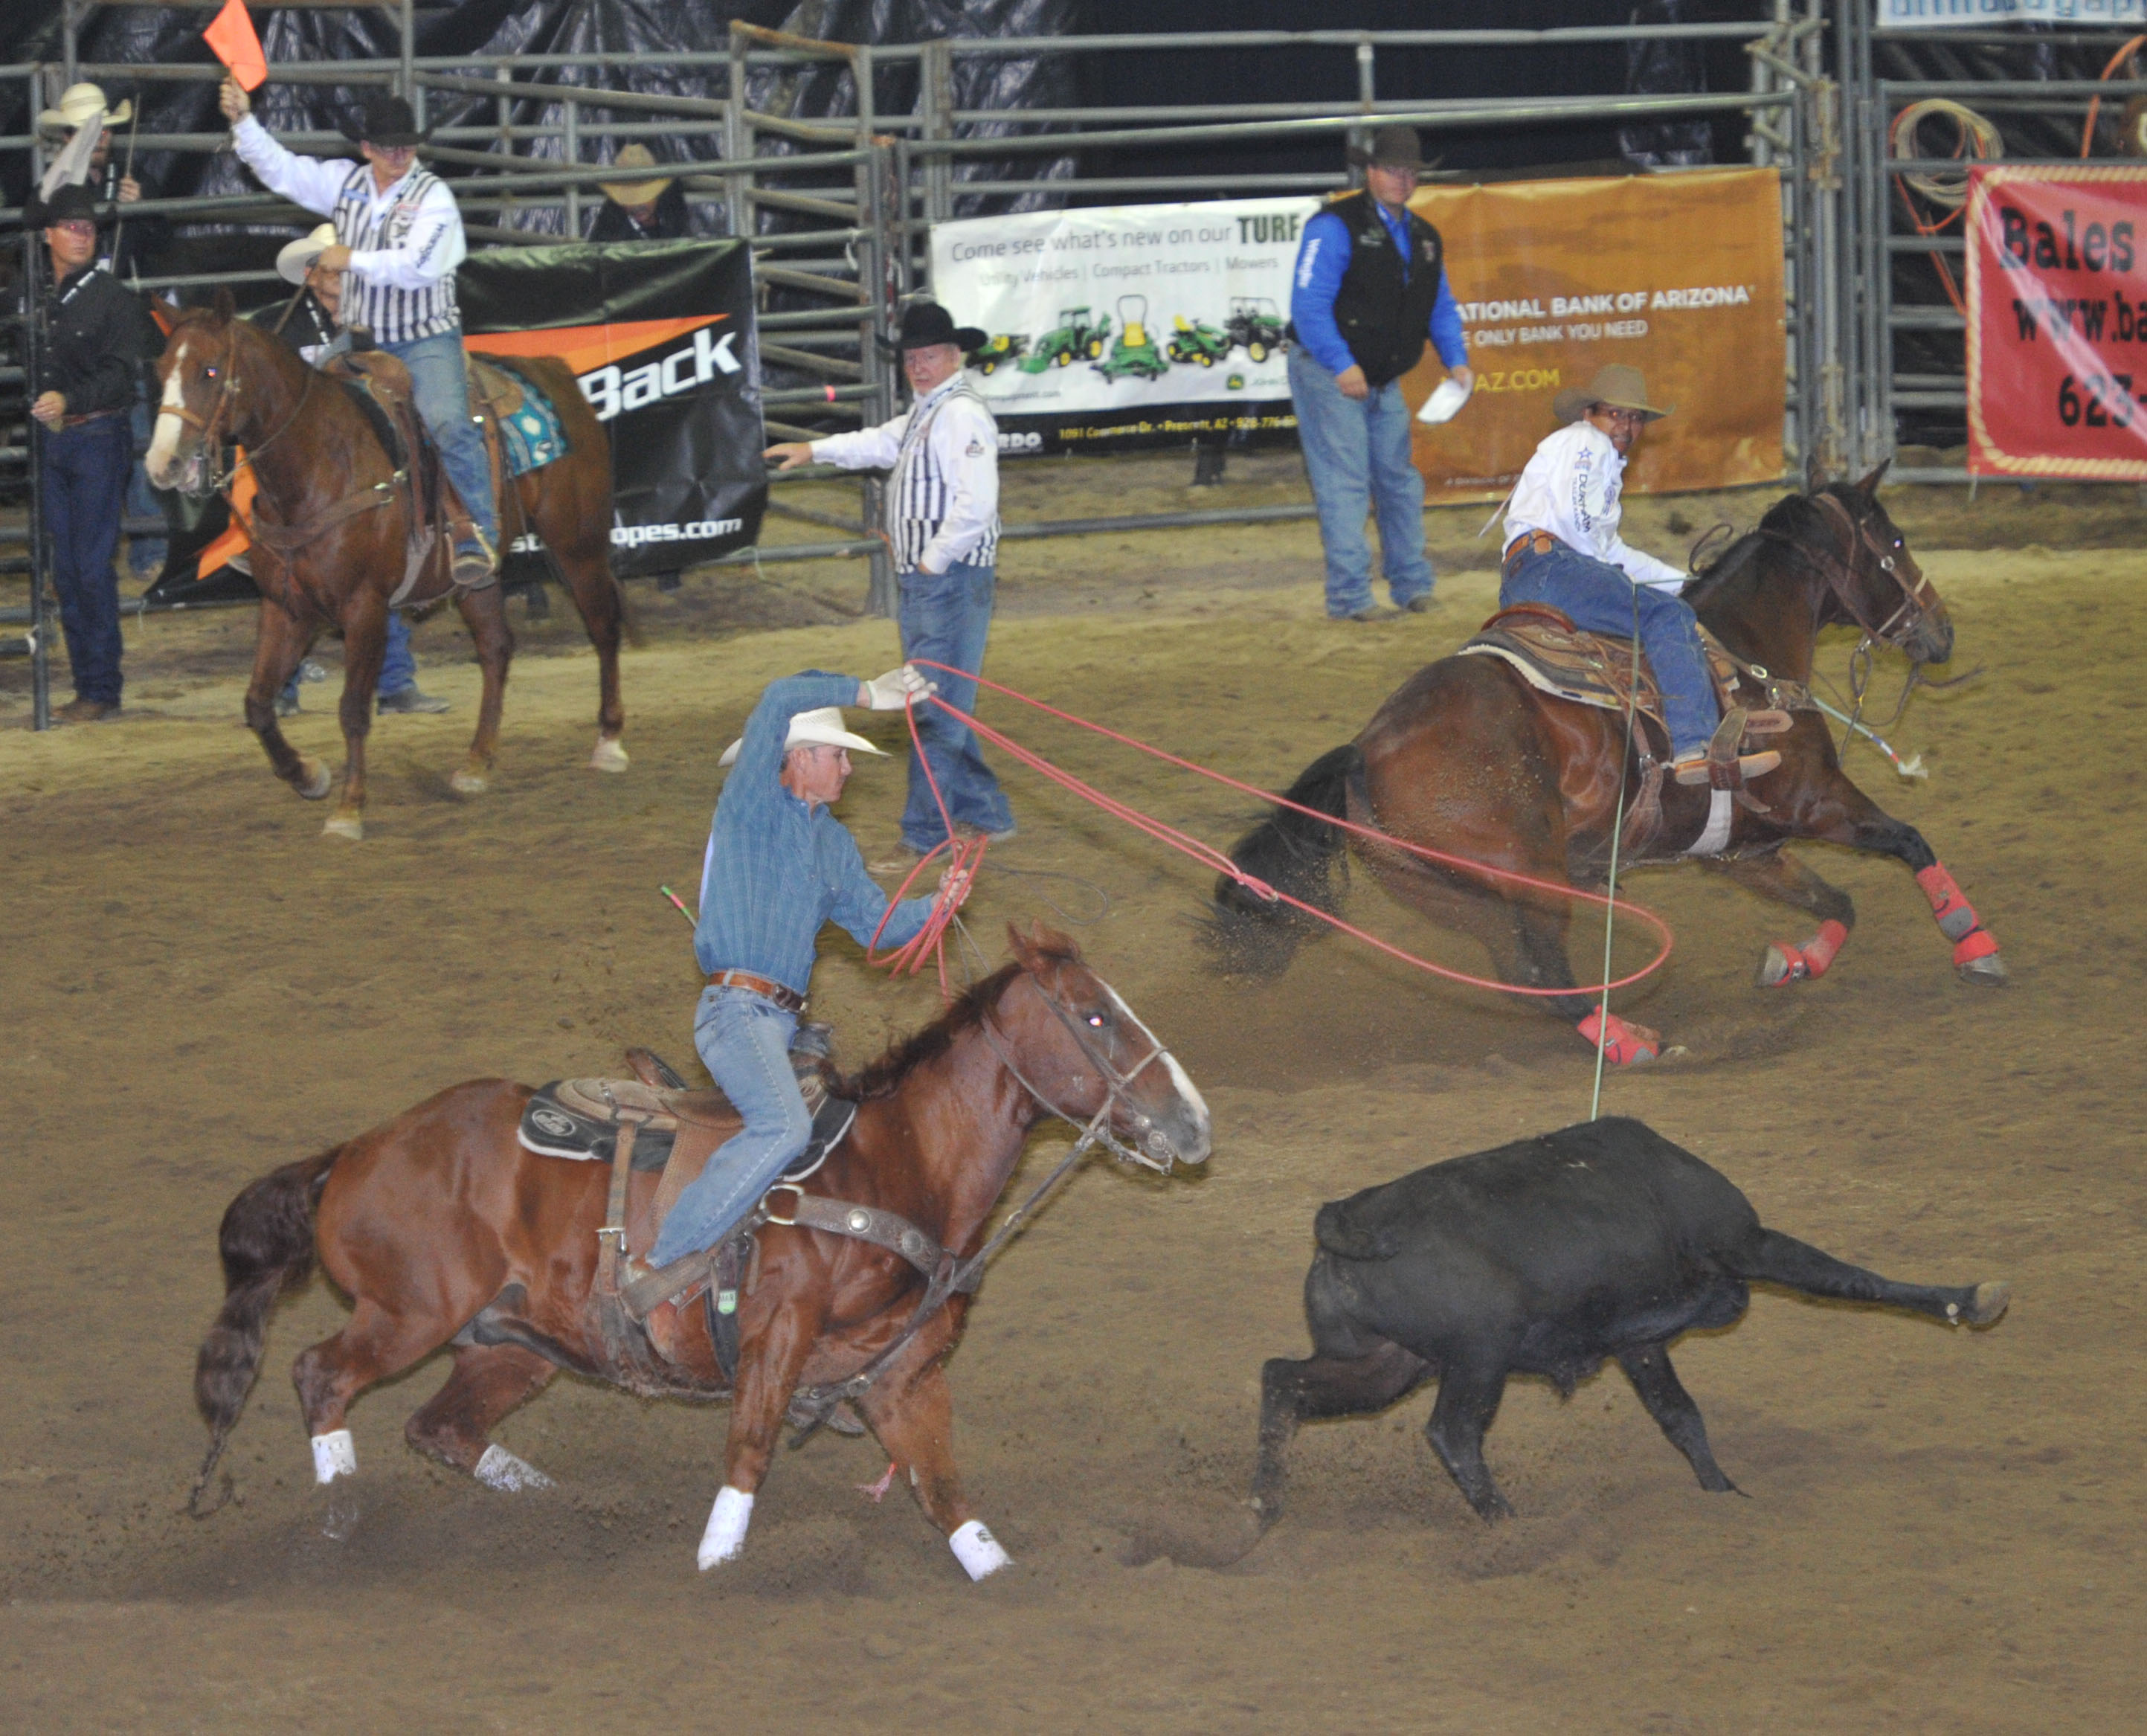 Pro Rodeo Native rodeo stars role models The Daily Courier